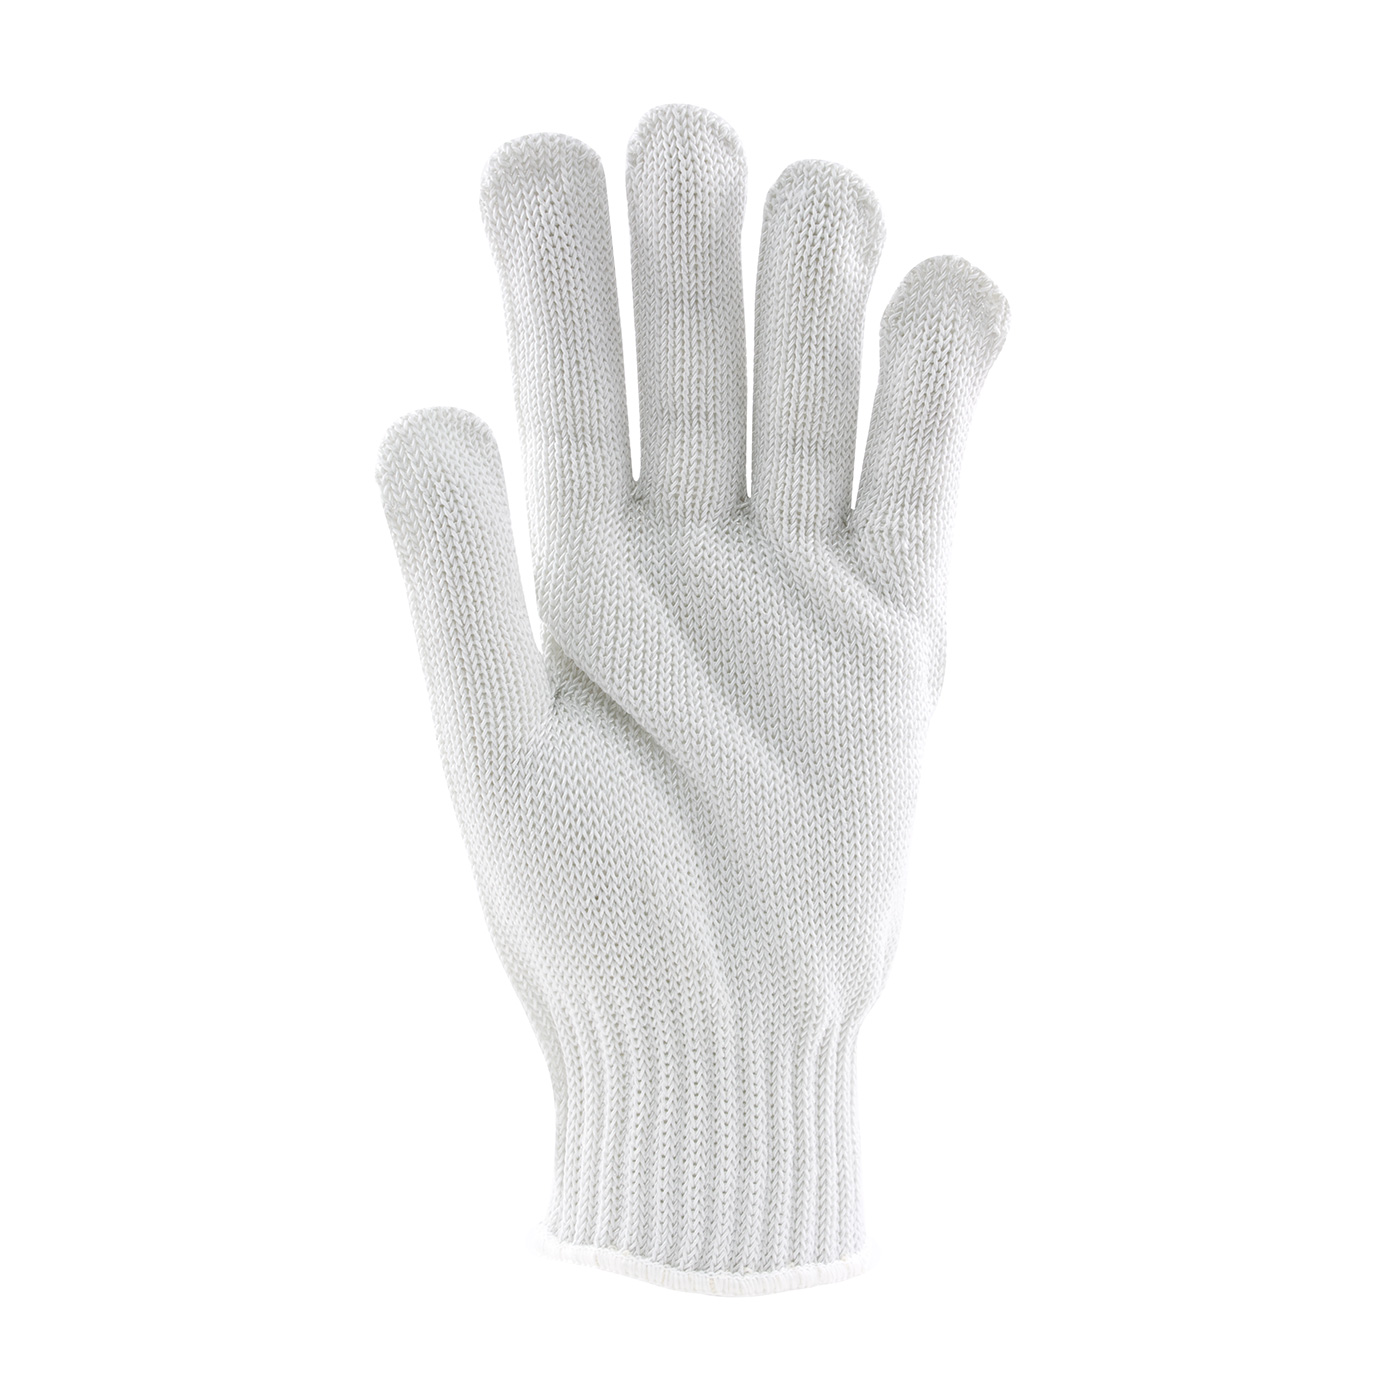 22-600 PIP Claw Cover® Seamless Knit PolyKor® Blended Antimicrobial Glove - Heavy Weight